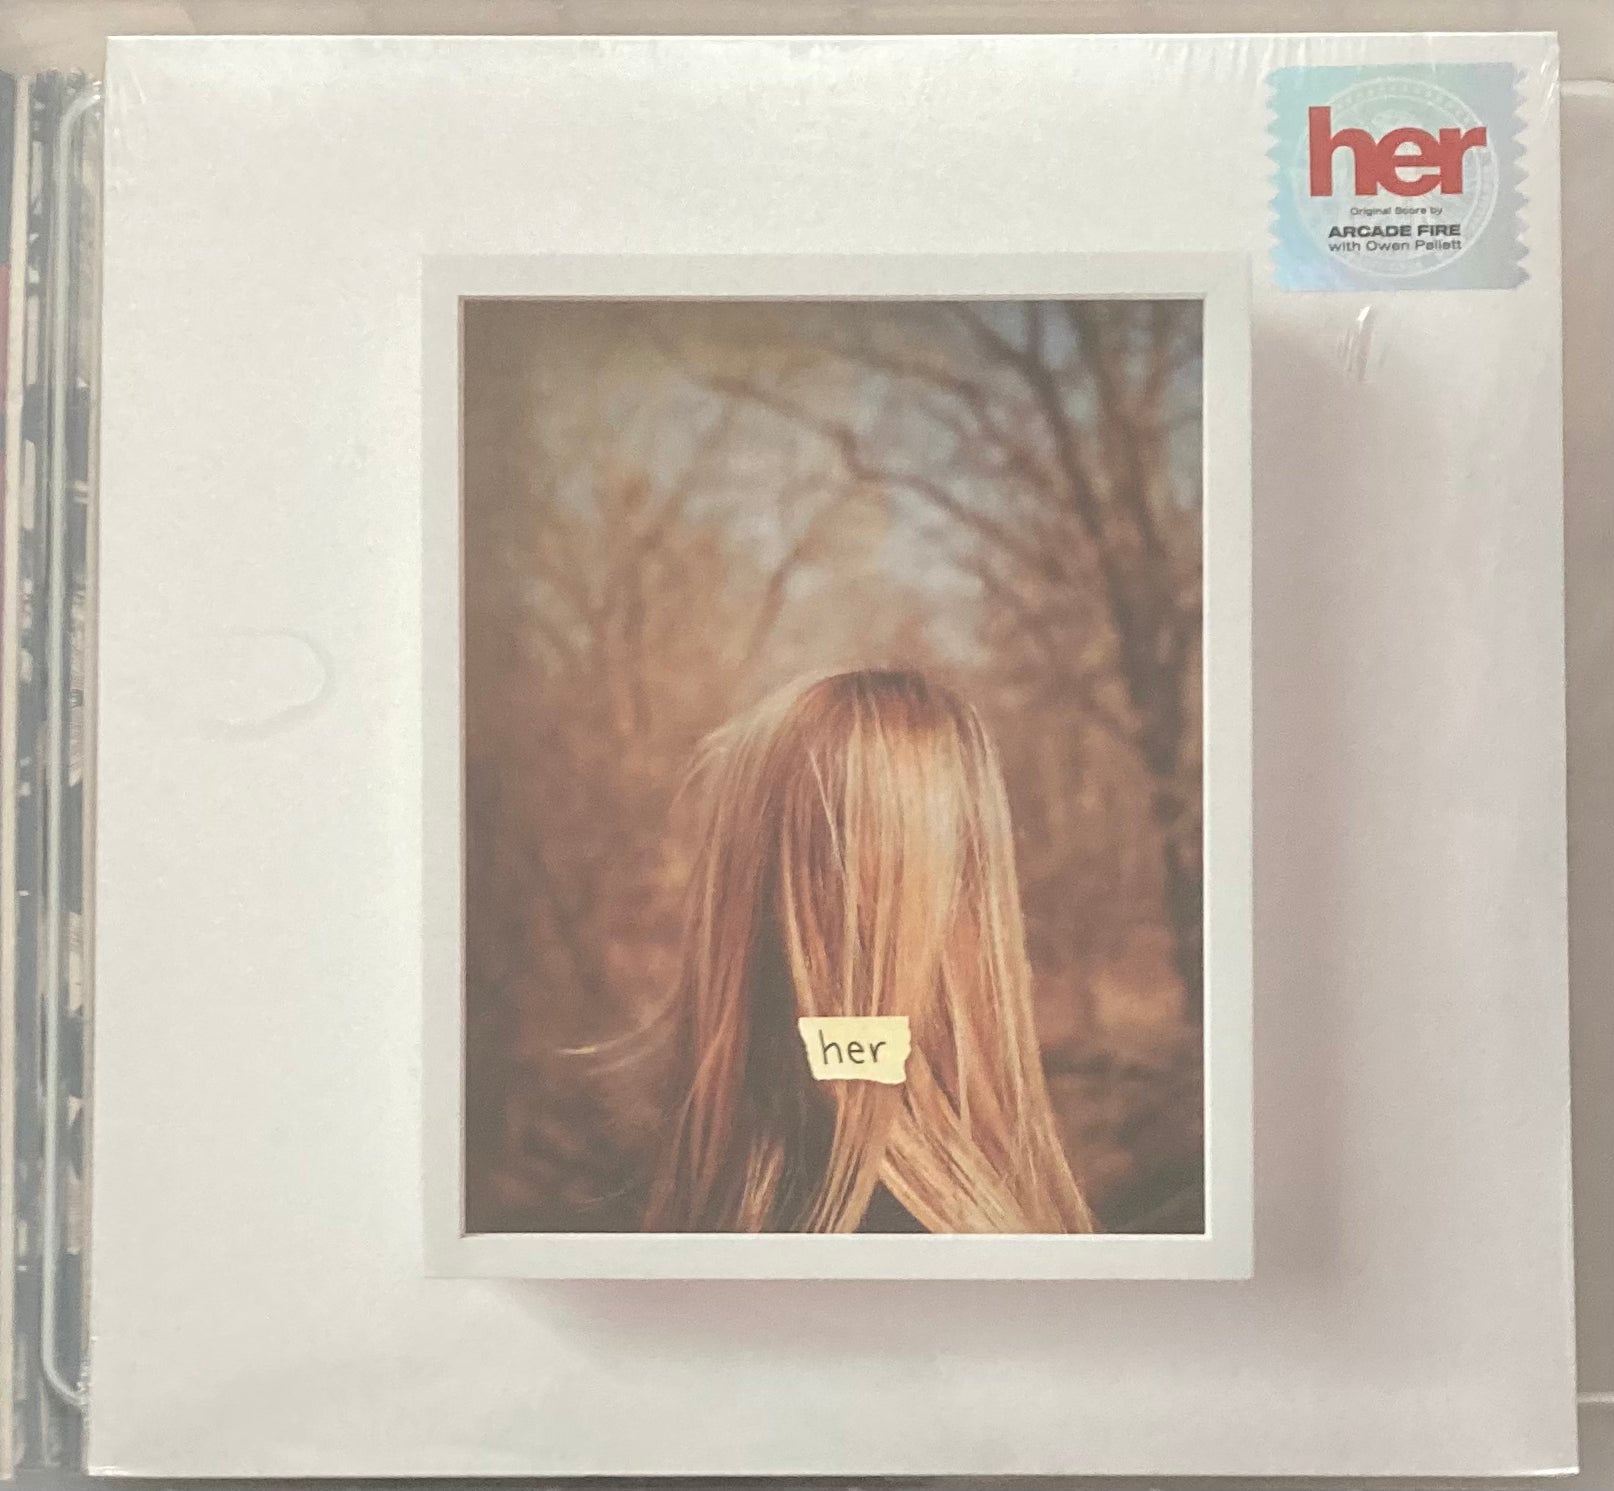 The front of 'Arcade Fire - Her' on vinyl